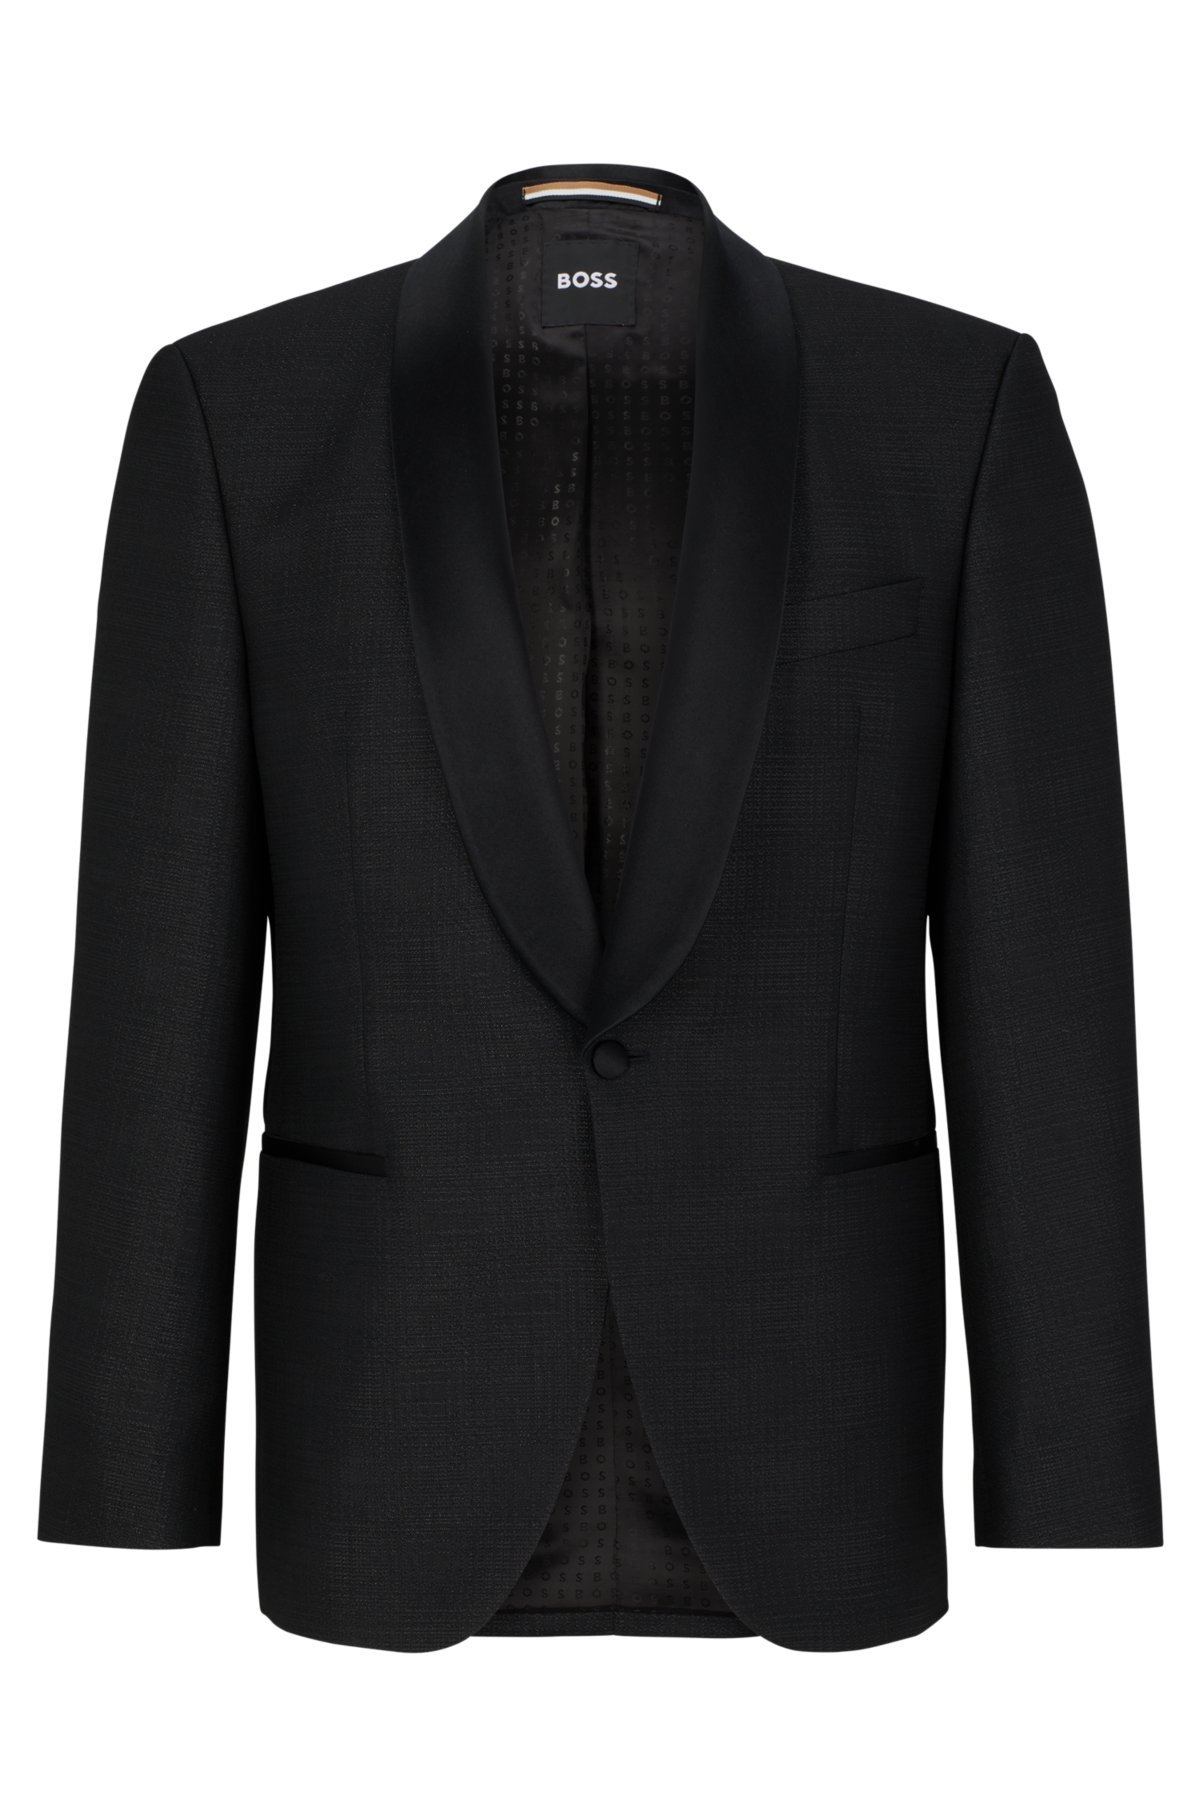 Regular-fit tuxedo jacket in a checked wool blend, Black